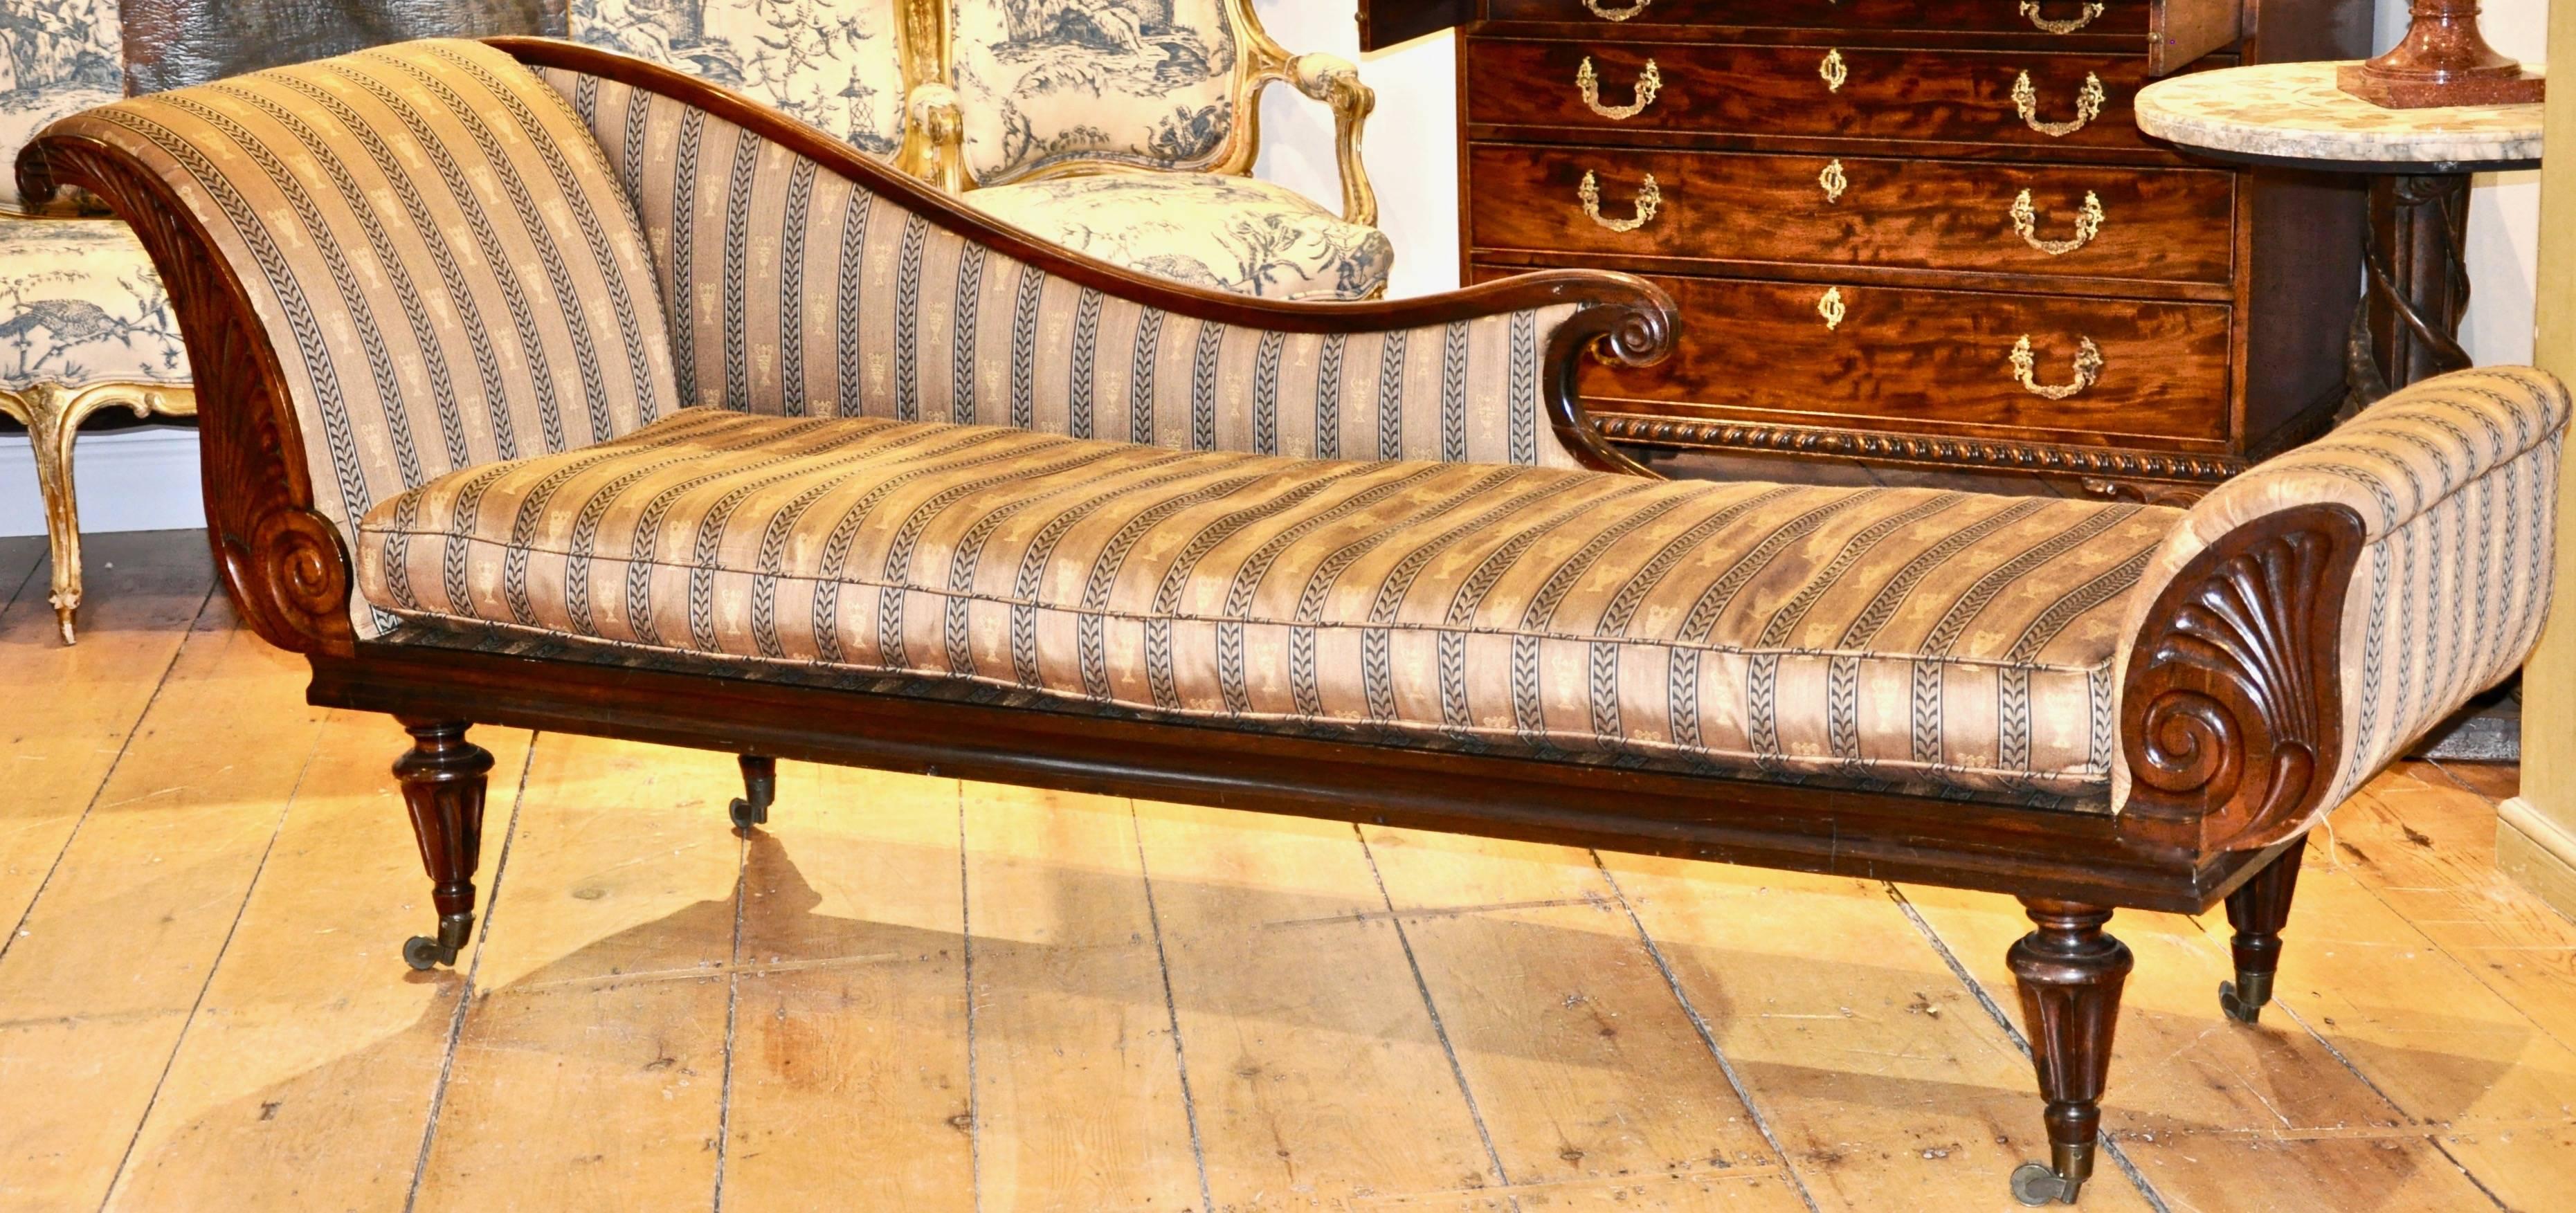 Period English Regency Rosewood Recamier in Manner of Marsh and Tatham

Neoclassical Form with wonderful modern length. Egyptian Revival Palmette at foot and Scrolled backrest
Four fluted legs
Now in period revival Regency fabric in usable